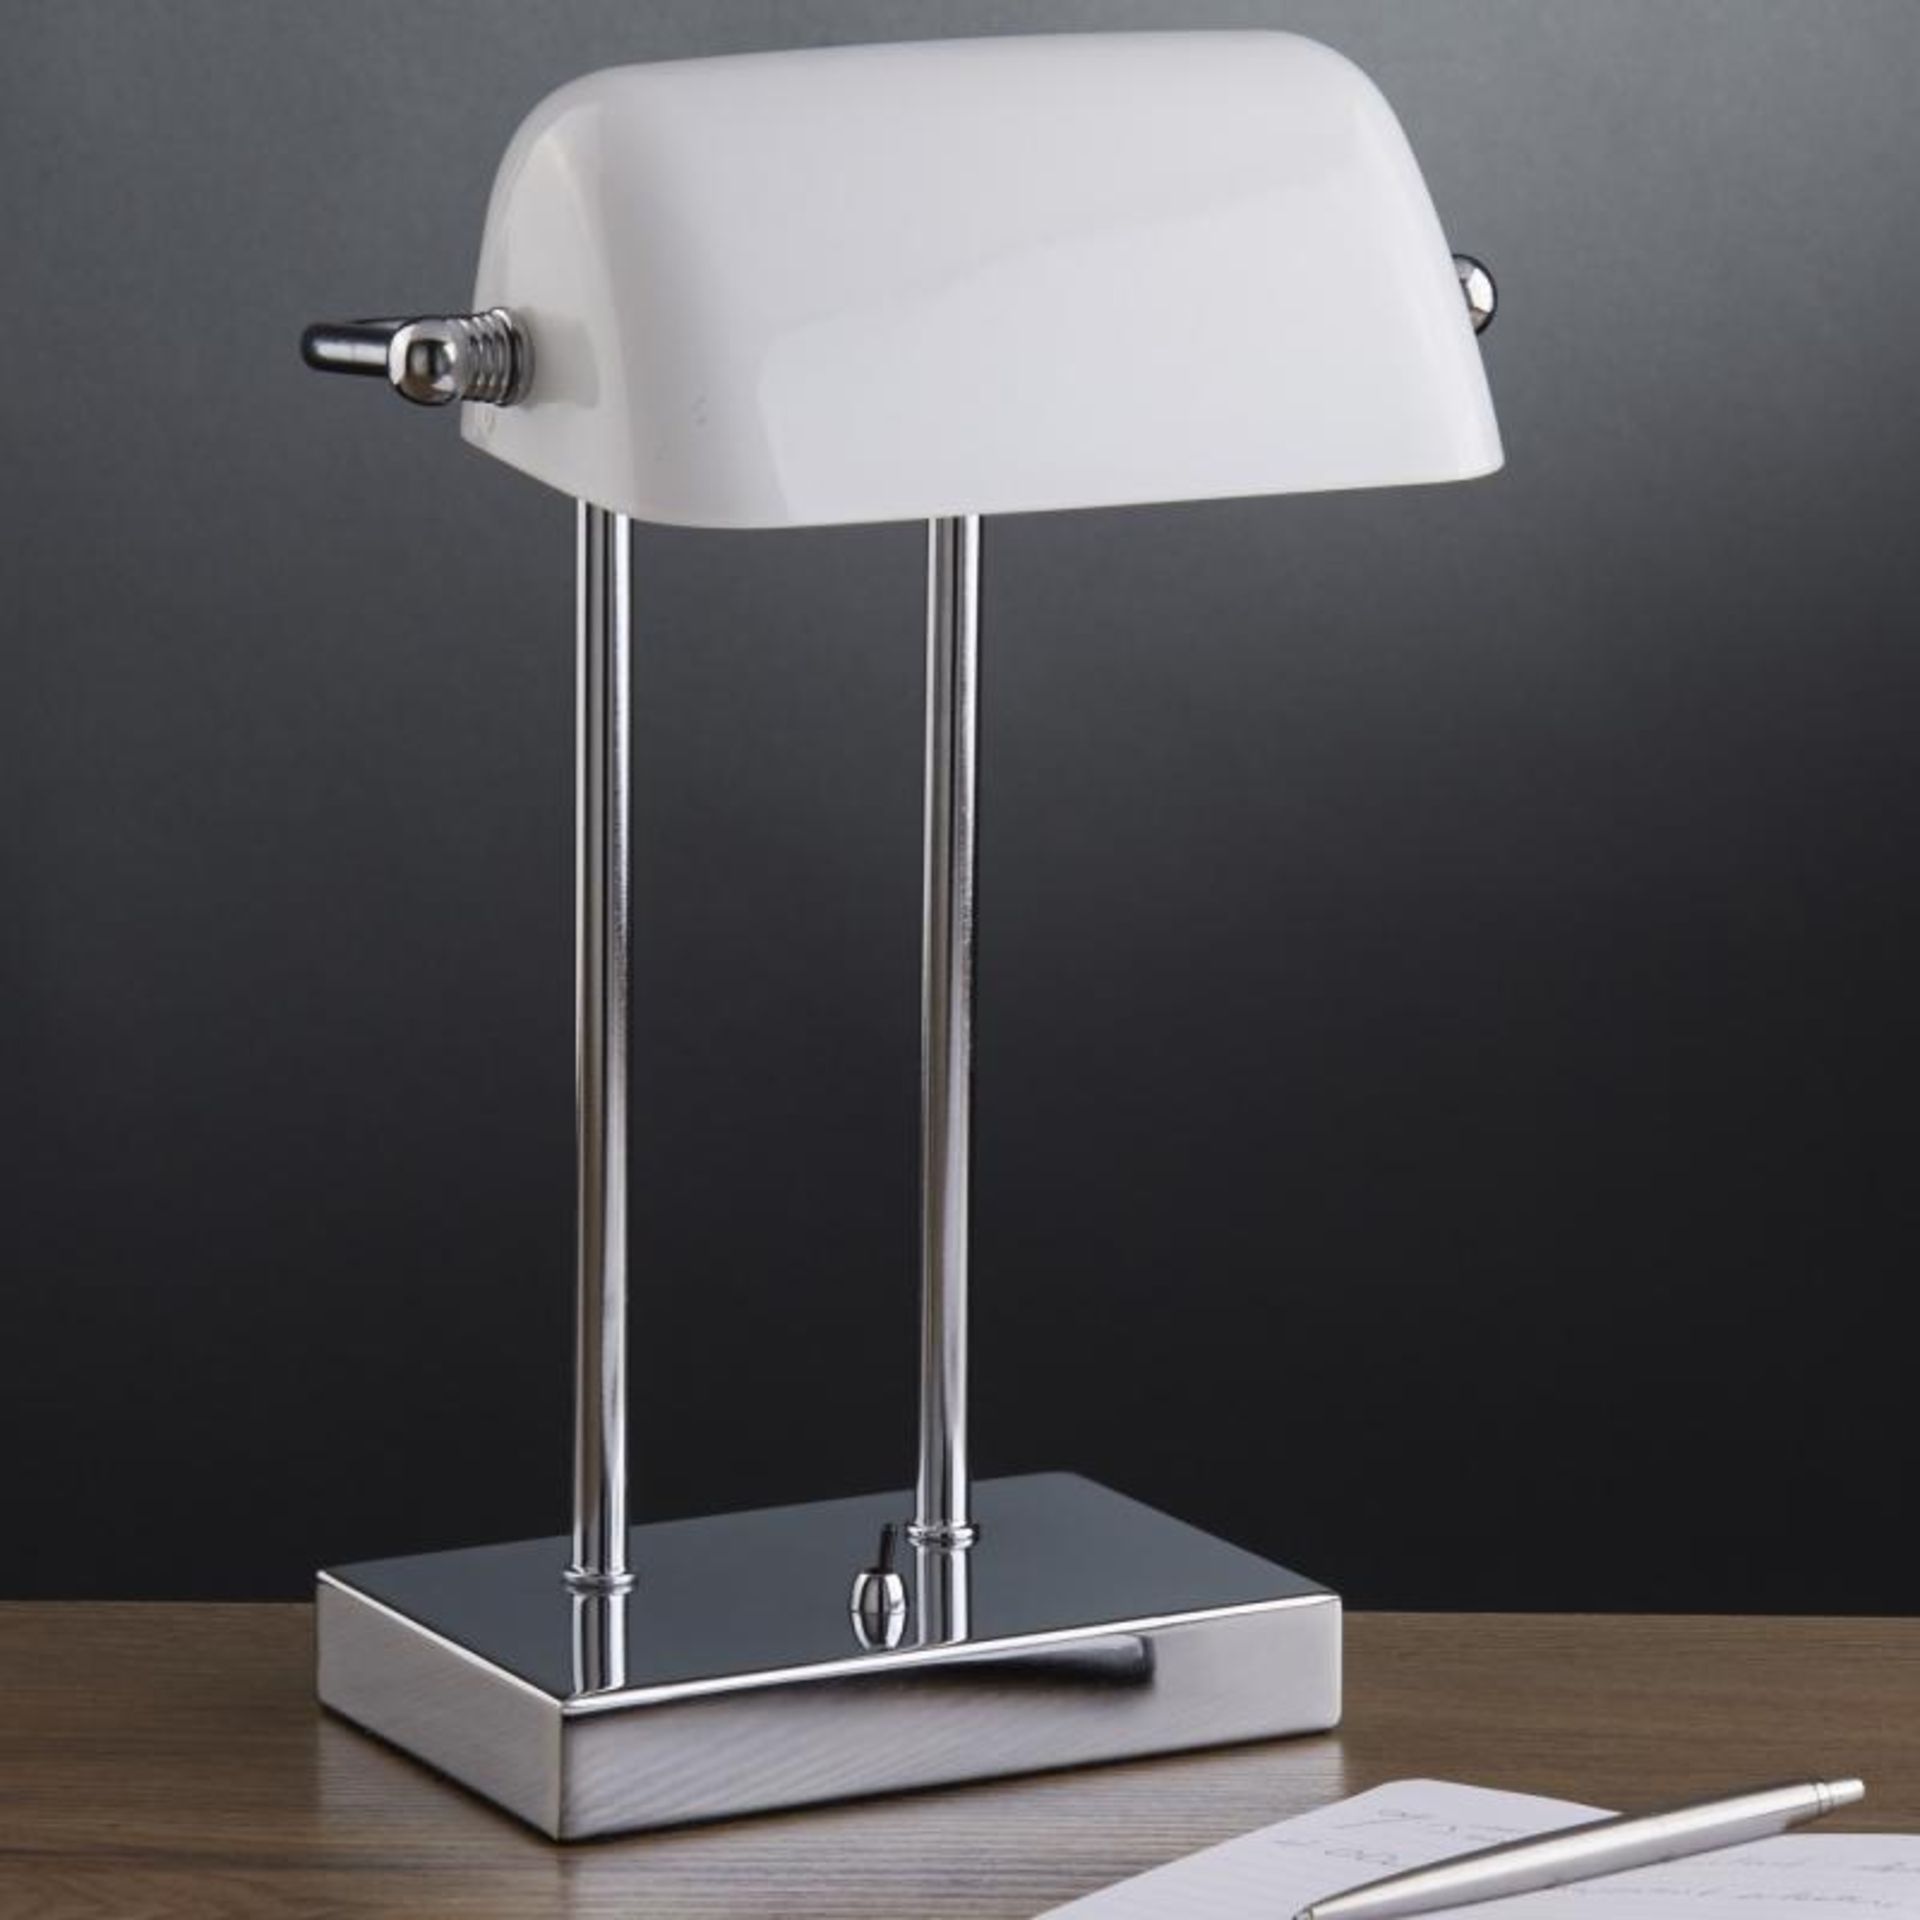 1 x Bankers Style Chrome Table Lamp With White Glass Shade - New Boxed Stock - CL323 - Ref: 1200CC / - Image 2 of 3